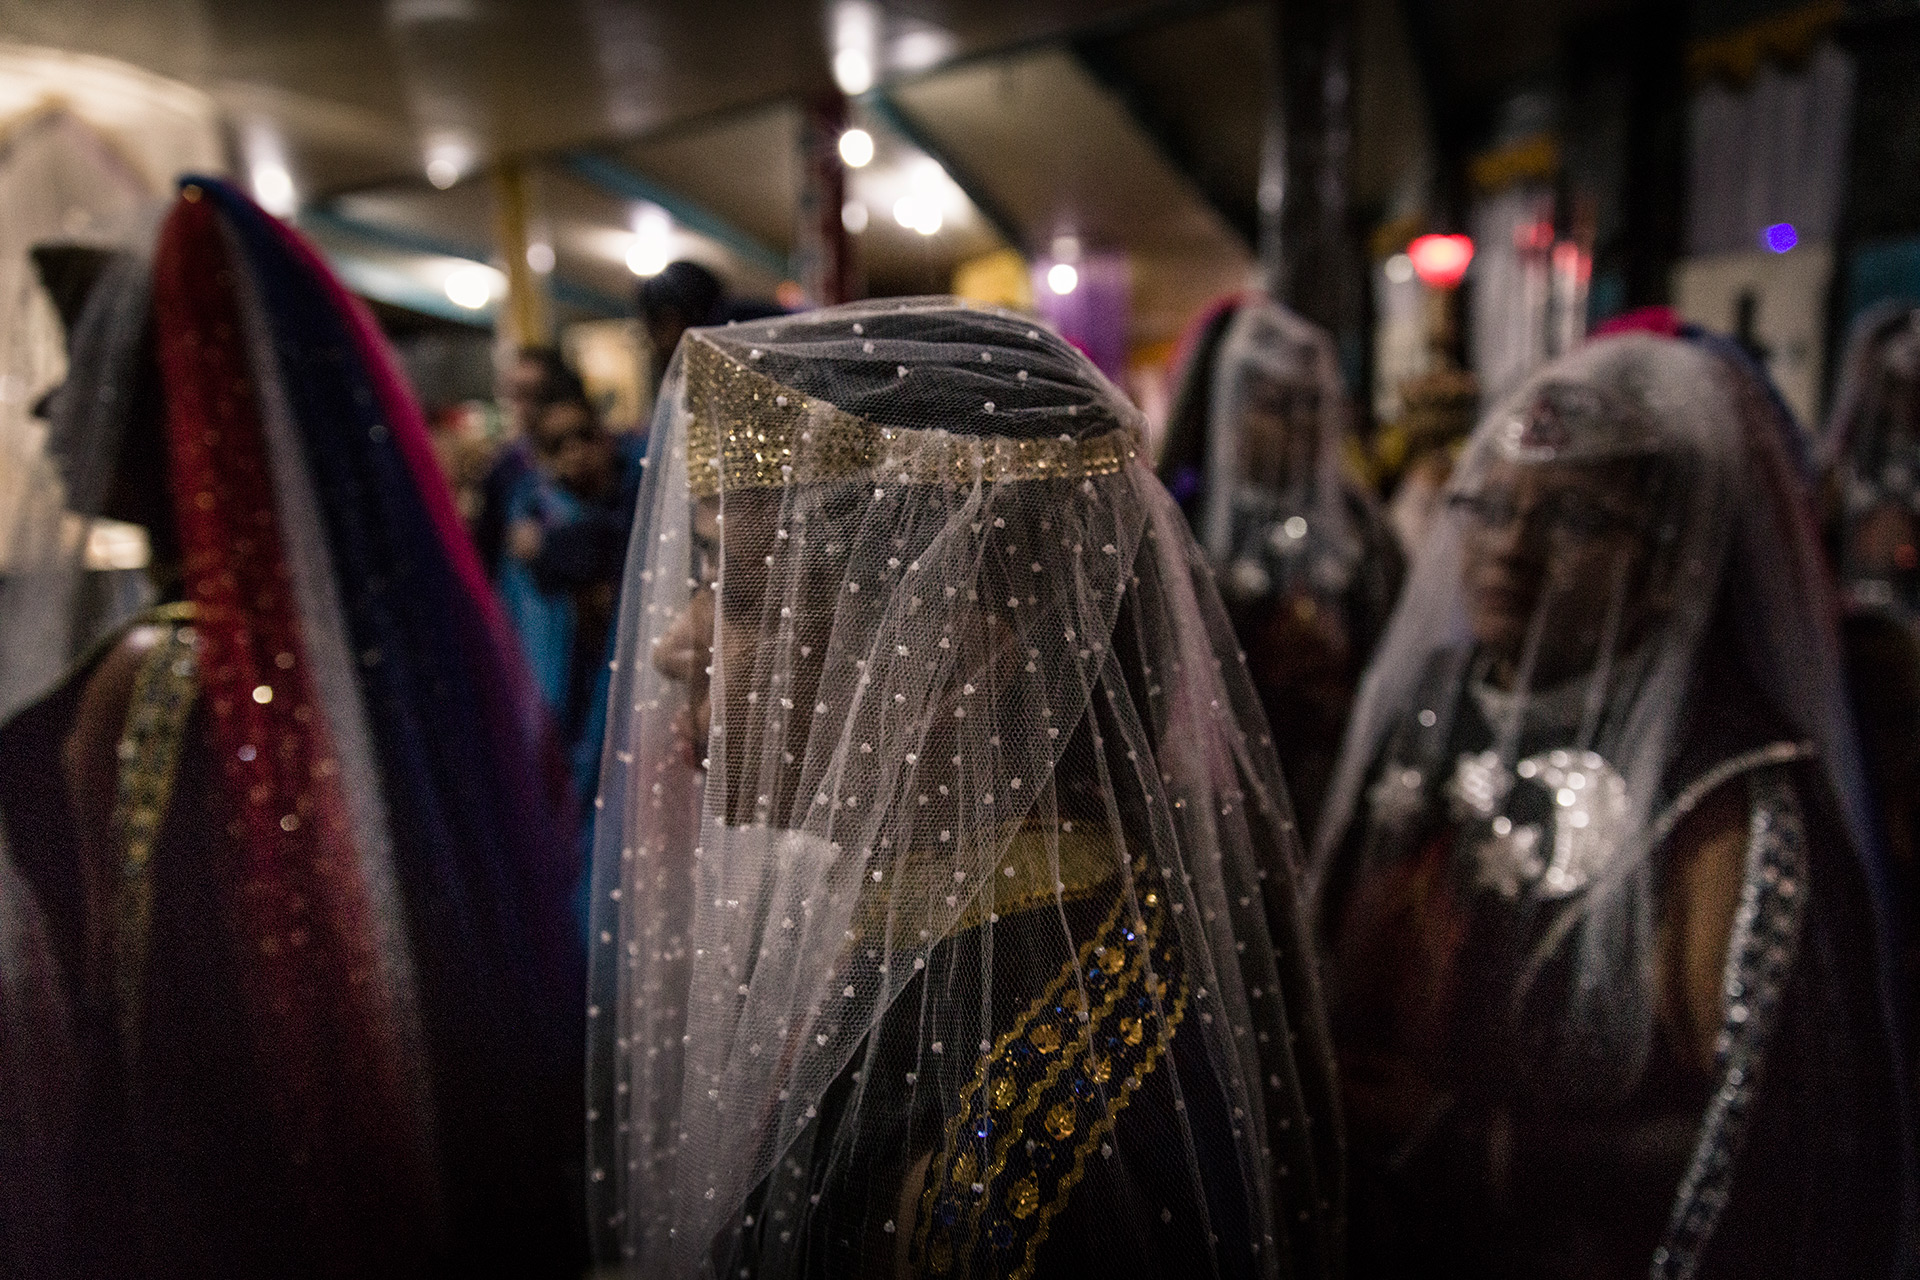 Woman in special outfits during the rituals.